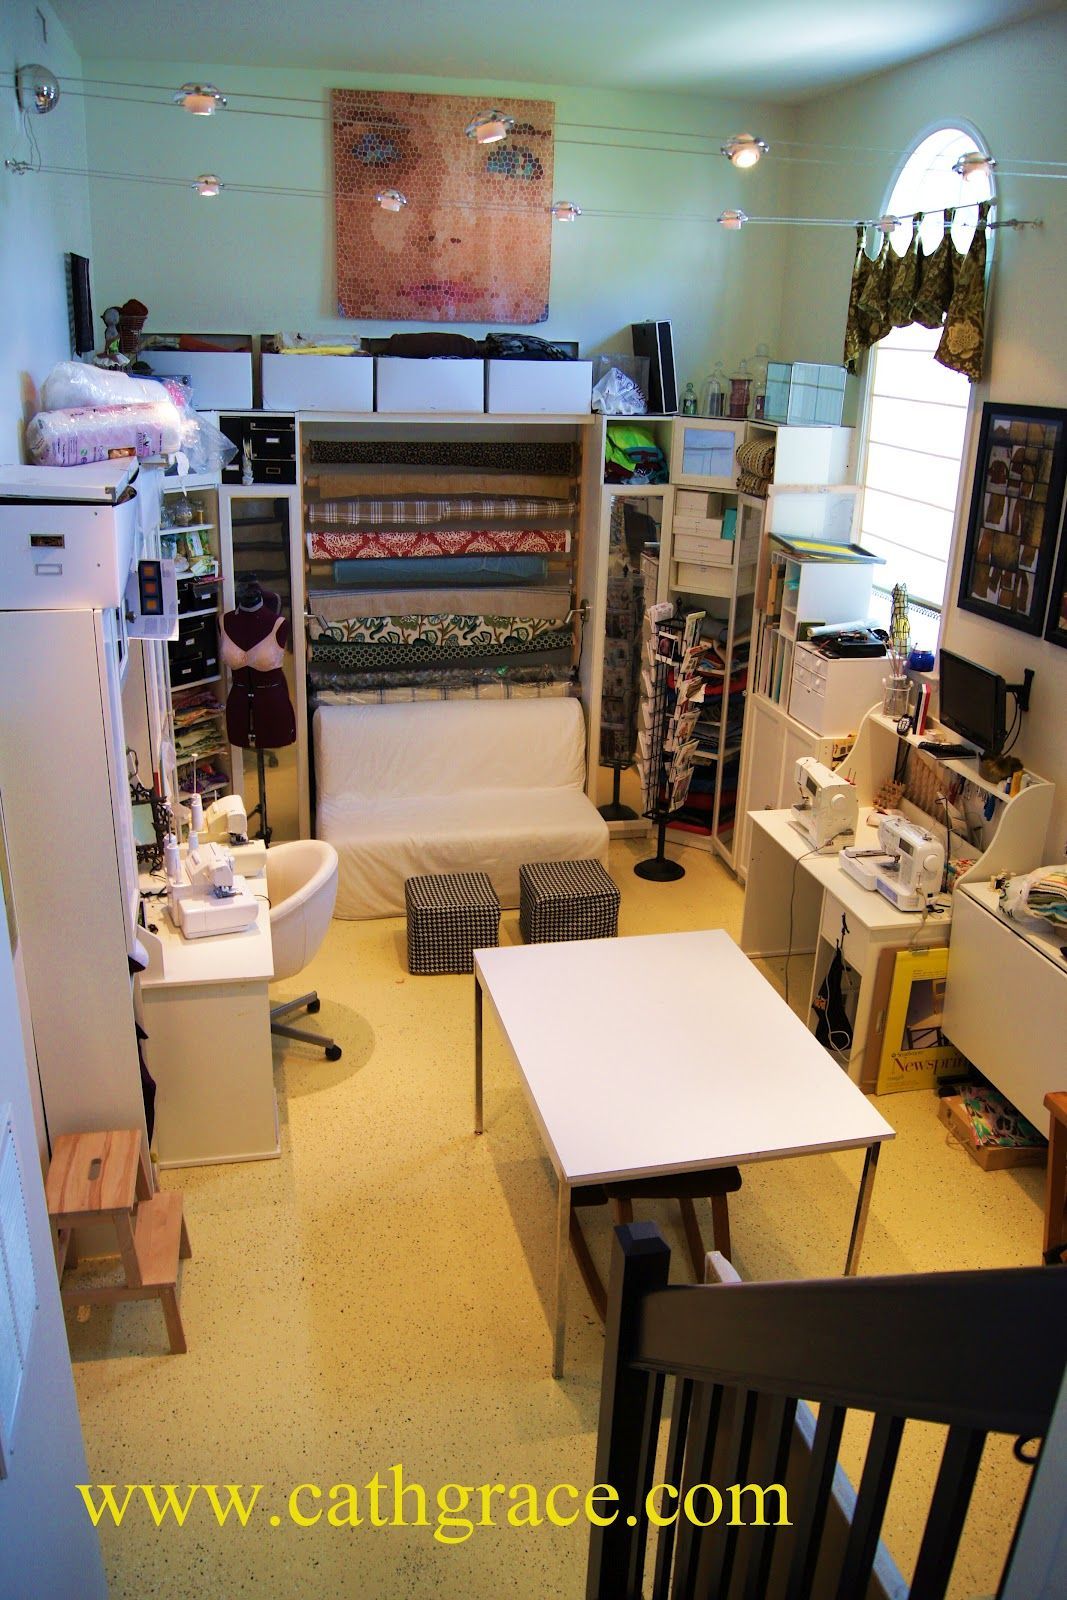 CathGrace: My Sewing Room / Craft Studio